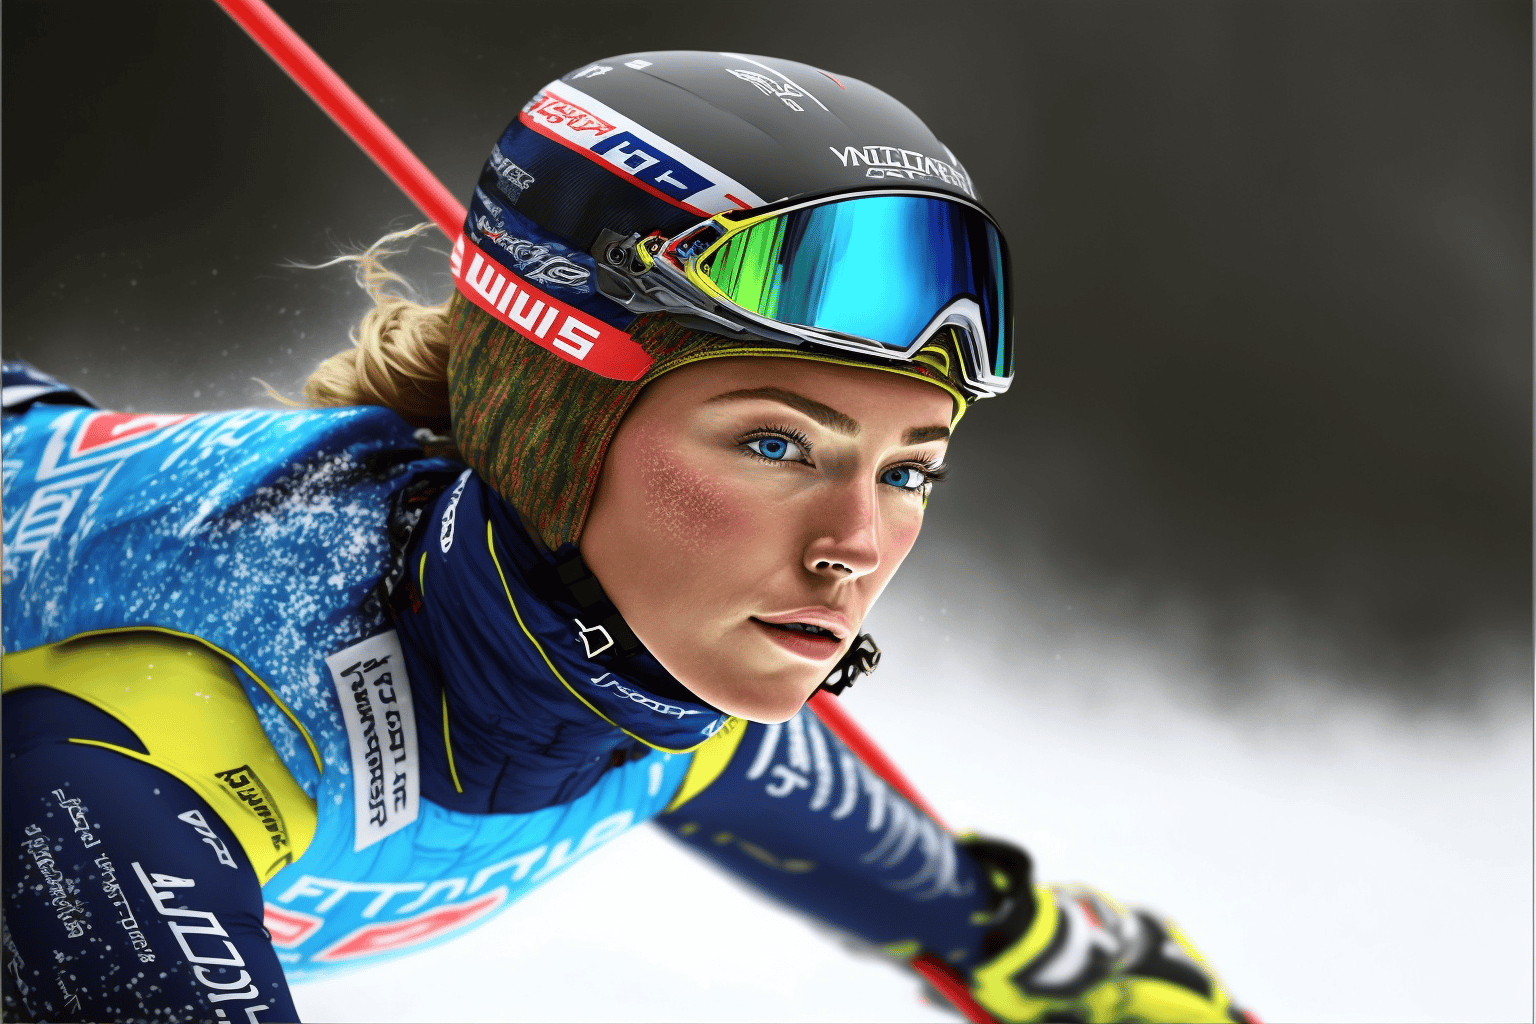 Mikaela Shiffrin Makes History with Record-Breaking World Cup Win